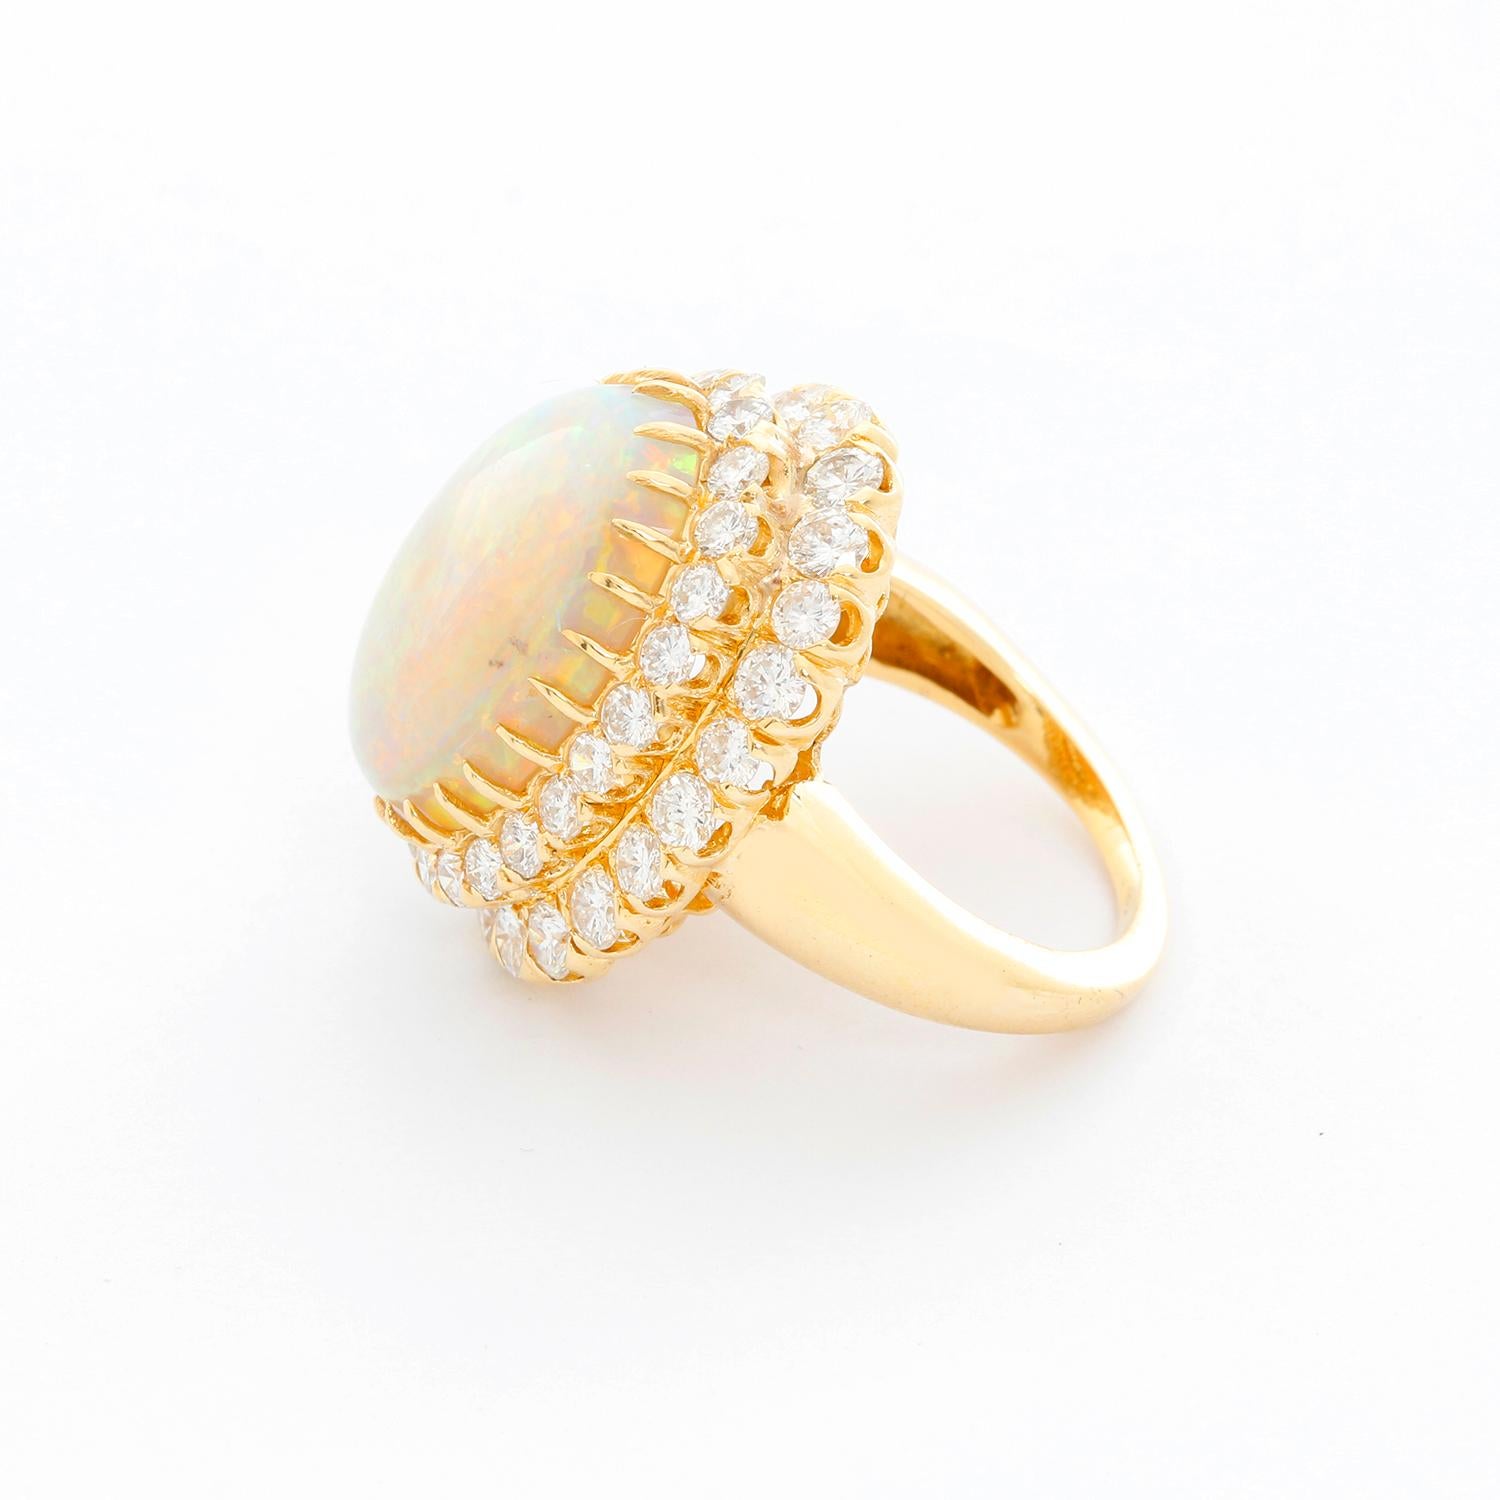 Brilliant Crystal Opal and Diamond Yellow Gold Ring Size 6.5 - Beautiful Crystal Opal ring weighing approx. 8 cts. set in 14K Yellow gold surrounded by a two rows diamonds. Diamond total weight is approx. 3 cts.  Total weight  14.3 grams. Ring size